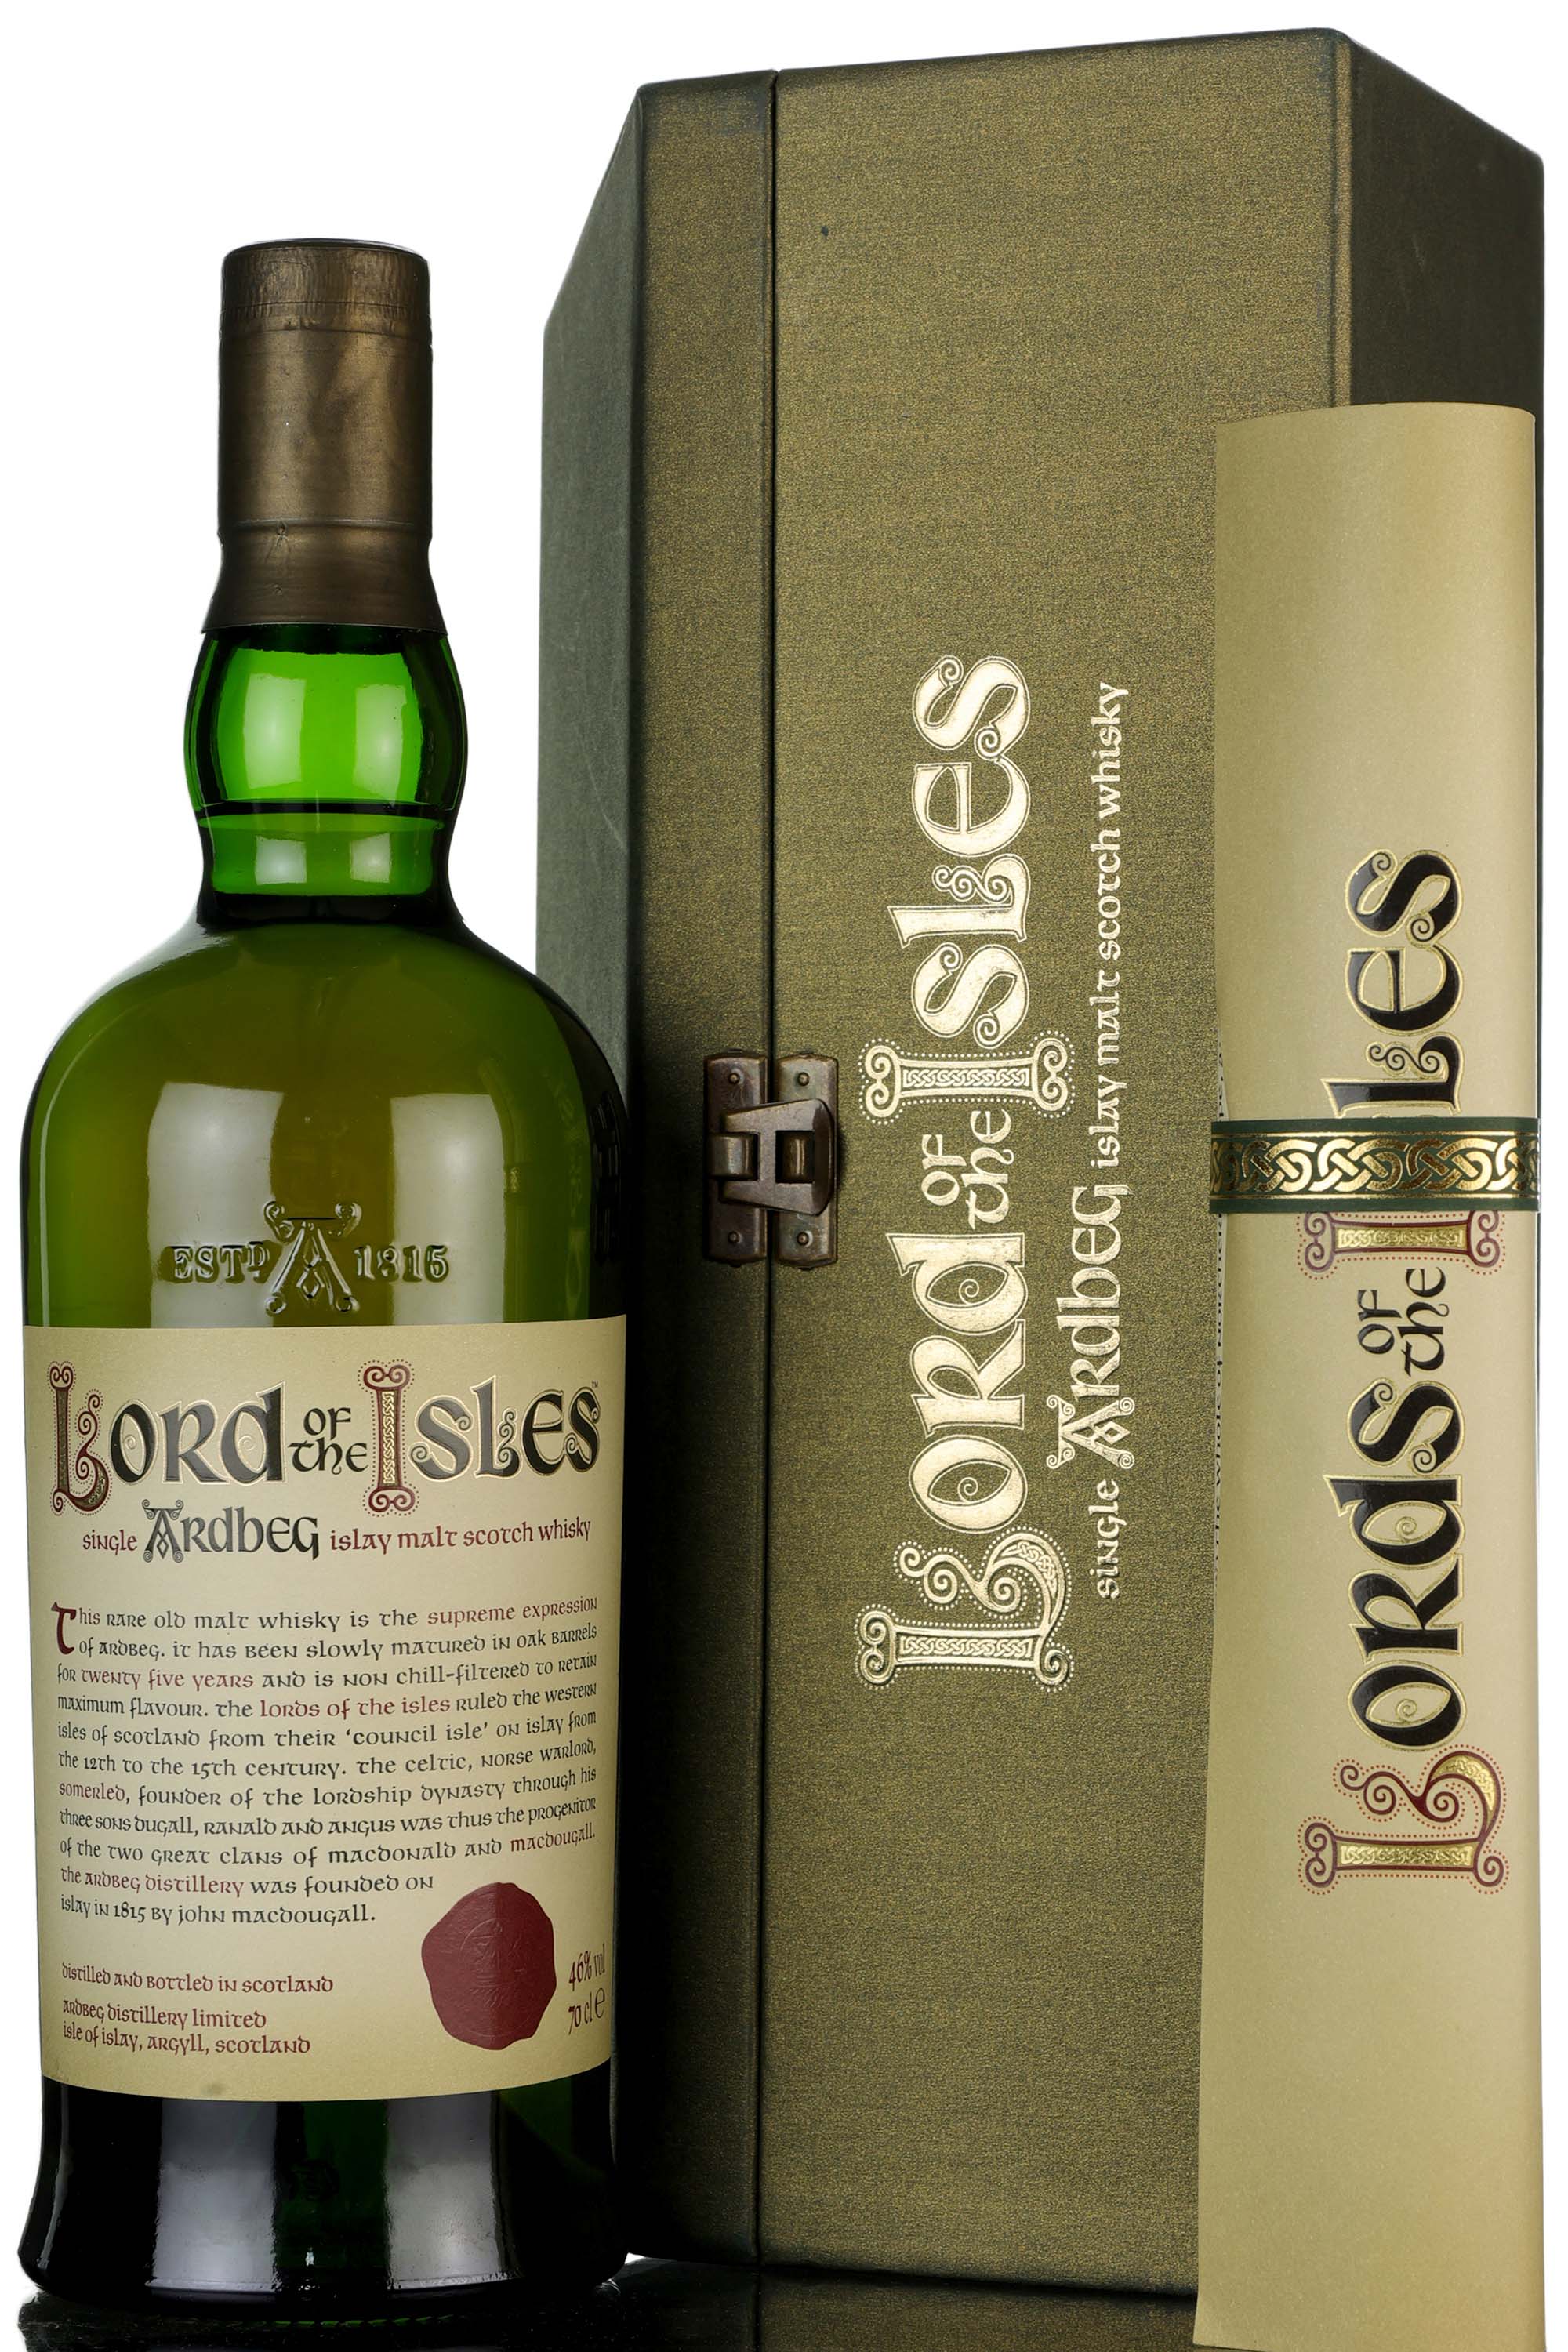 Ardbeg 25 Year Old - Lord Of The Isles - 2006 Release